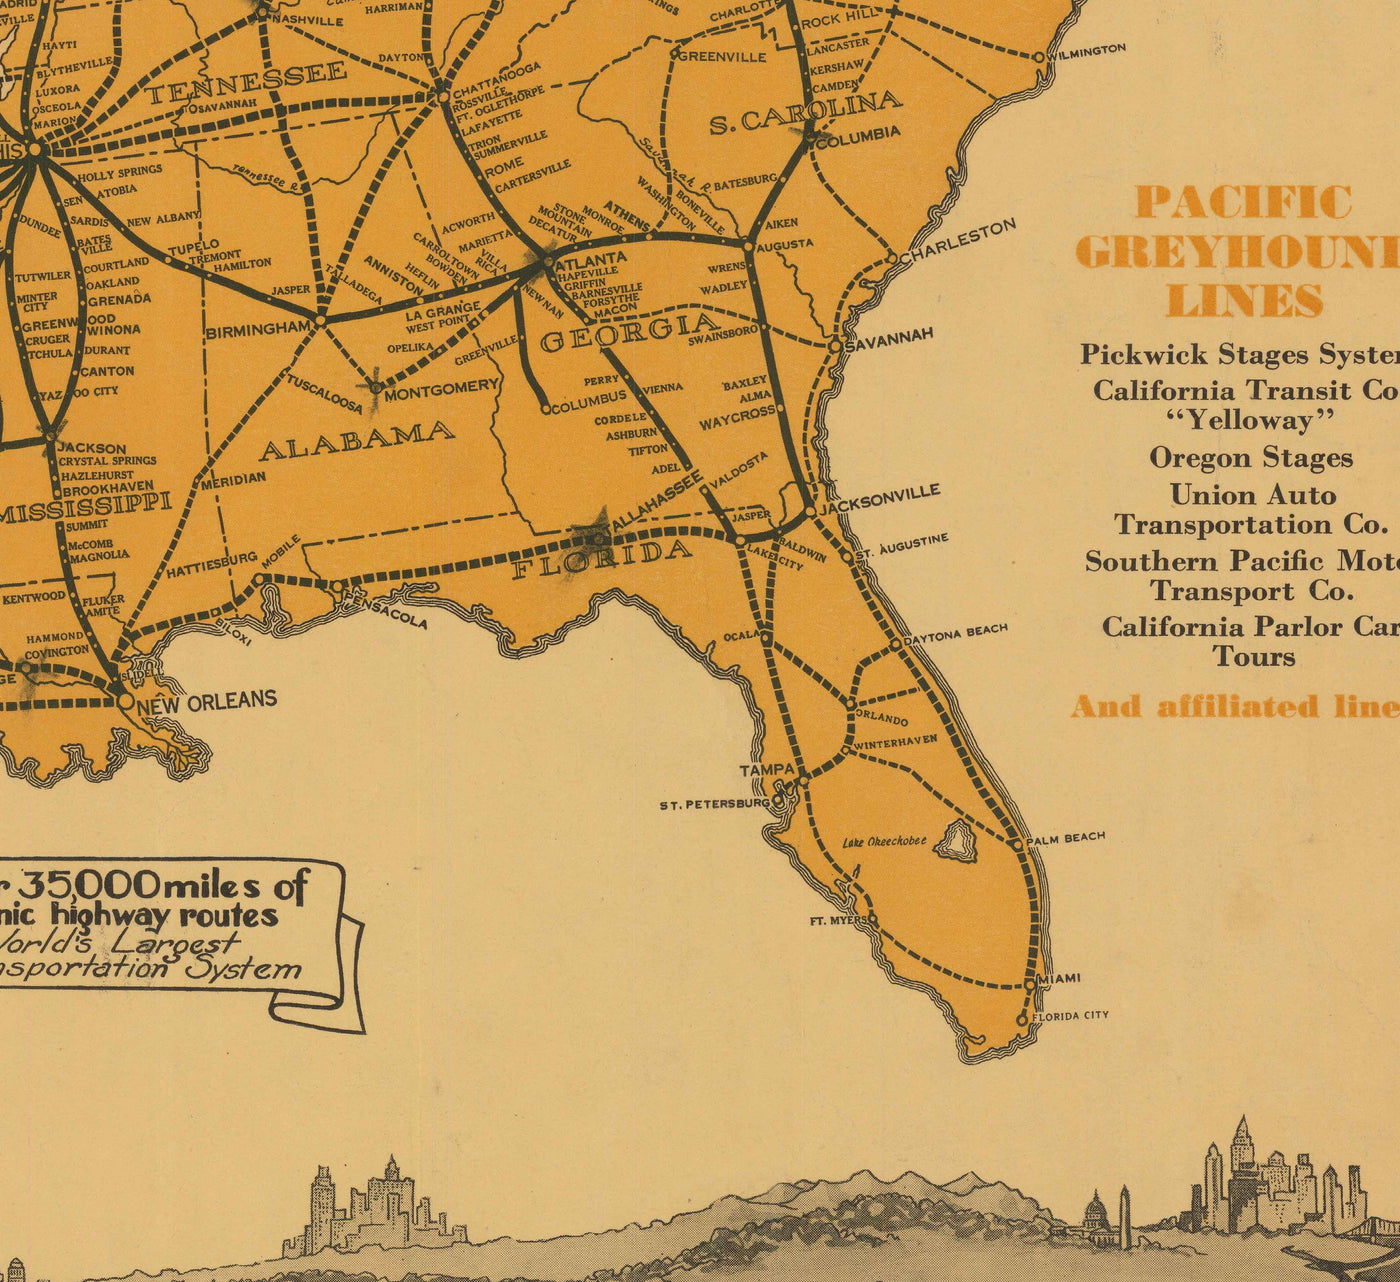 Old Greyhound Lines Map, USA, 1935 - Pacific & Main Intercity Bus Lines - Over 35,000 Miles Of Scenic Highways!